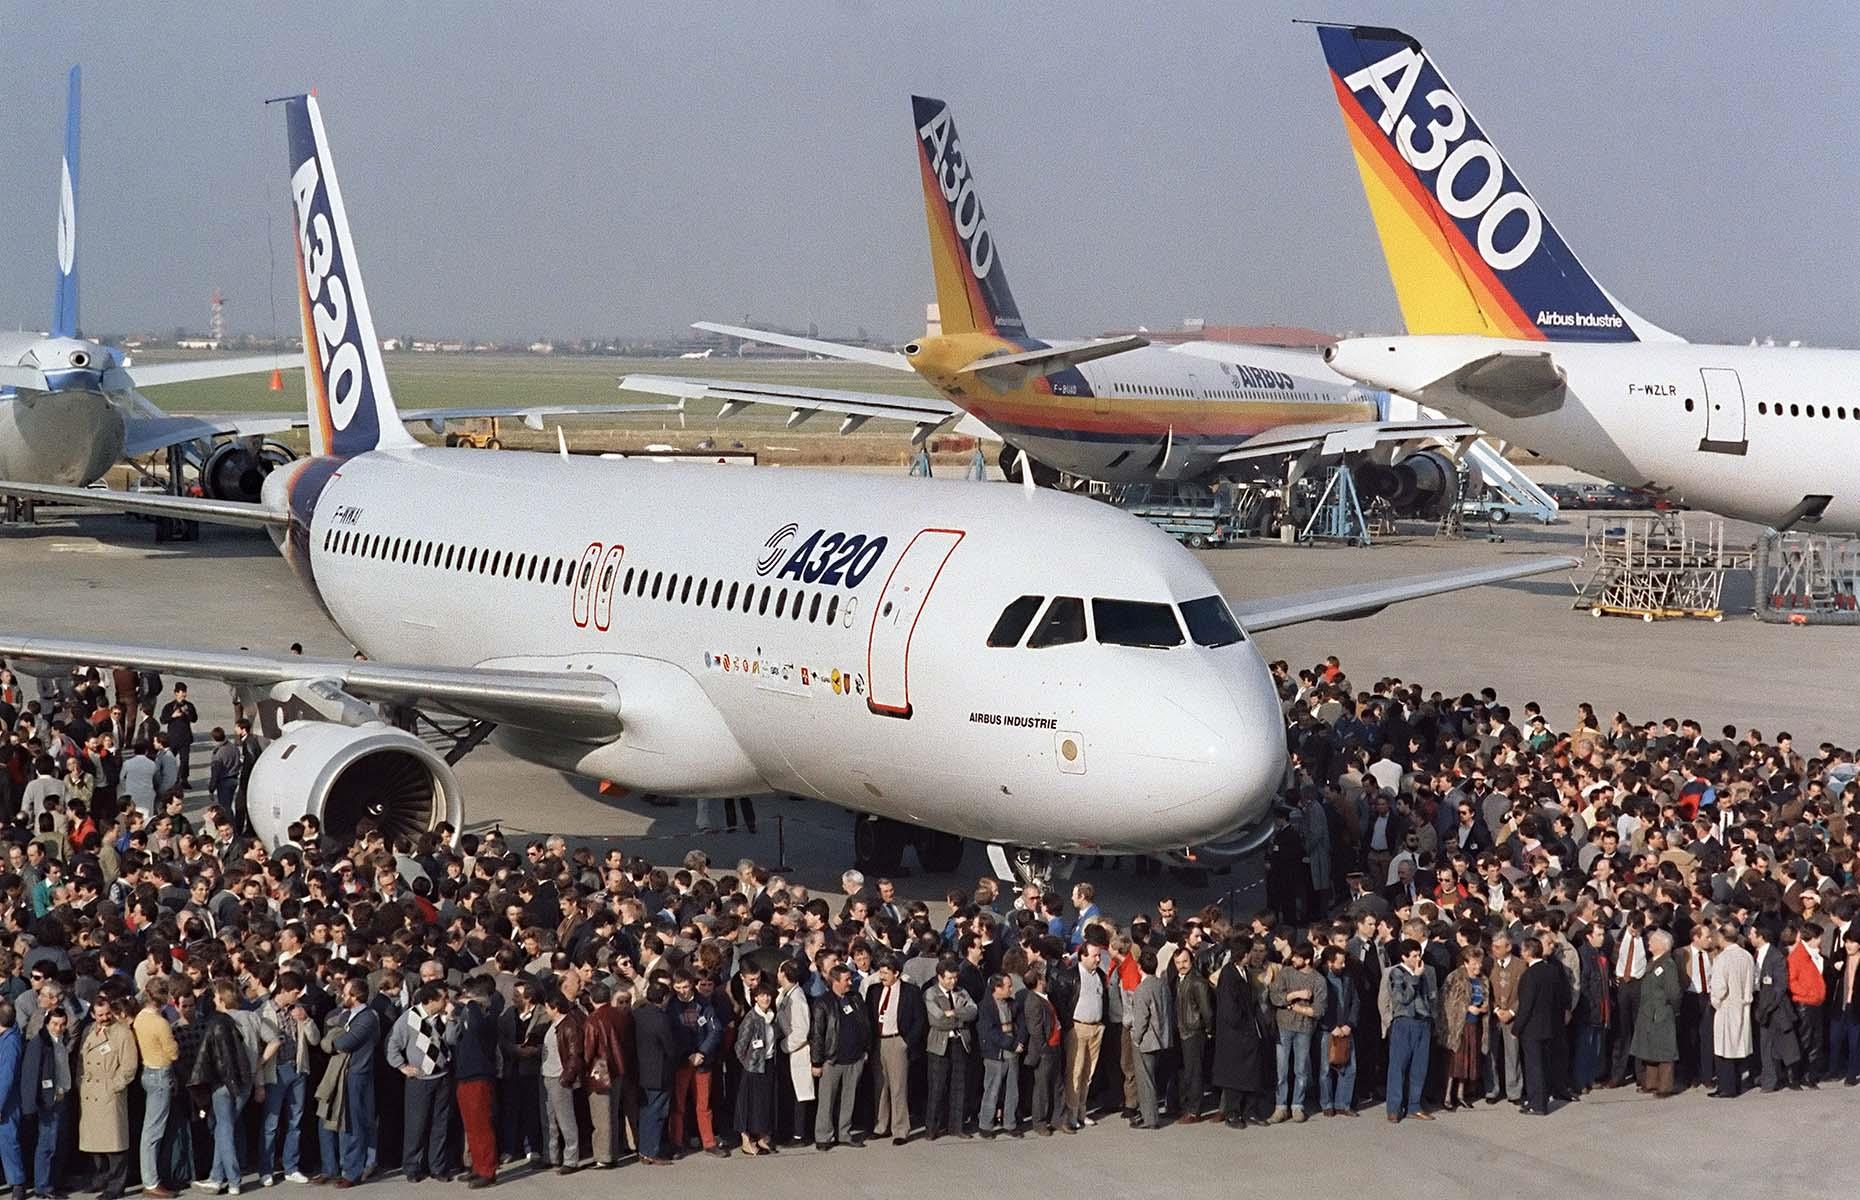 Launched in the late 1980s, the A320 was Airbus' attempt at catching up with its biggest competitor, Boeing. This Airbus aircraft made significant advancements on the tech side – it was first to implement fly-by-wire flight controls, a system where manual controls are replaced with an electronic interface, and side-sticks for improved ergonomics of the crew. The fly-by-wire technology was later incorporated into other Airbus aircraft, like the A380.